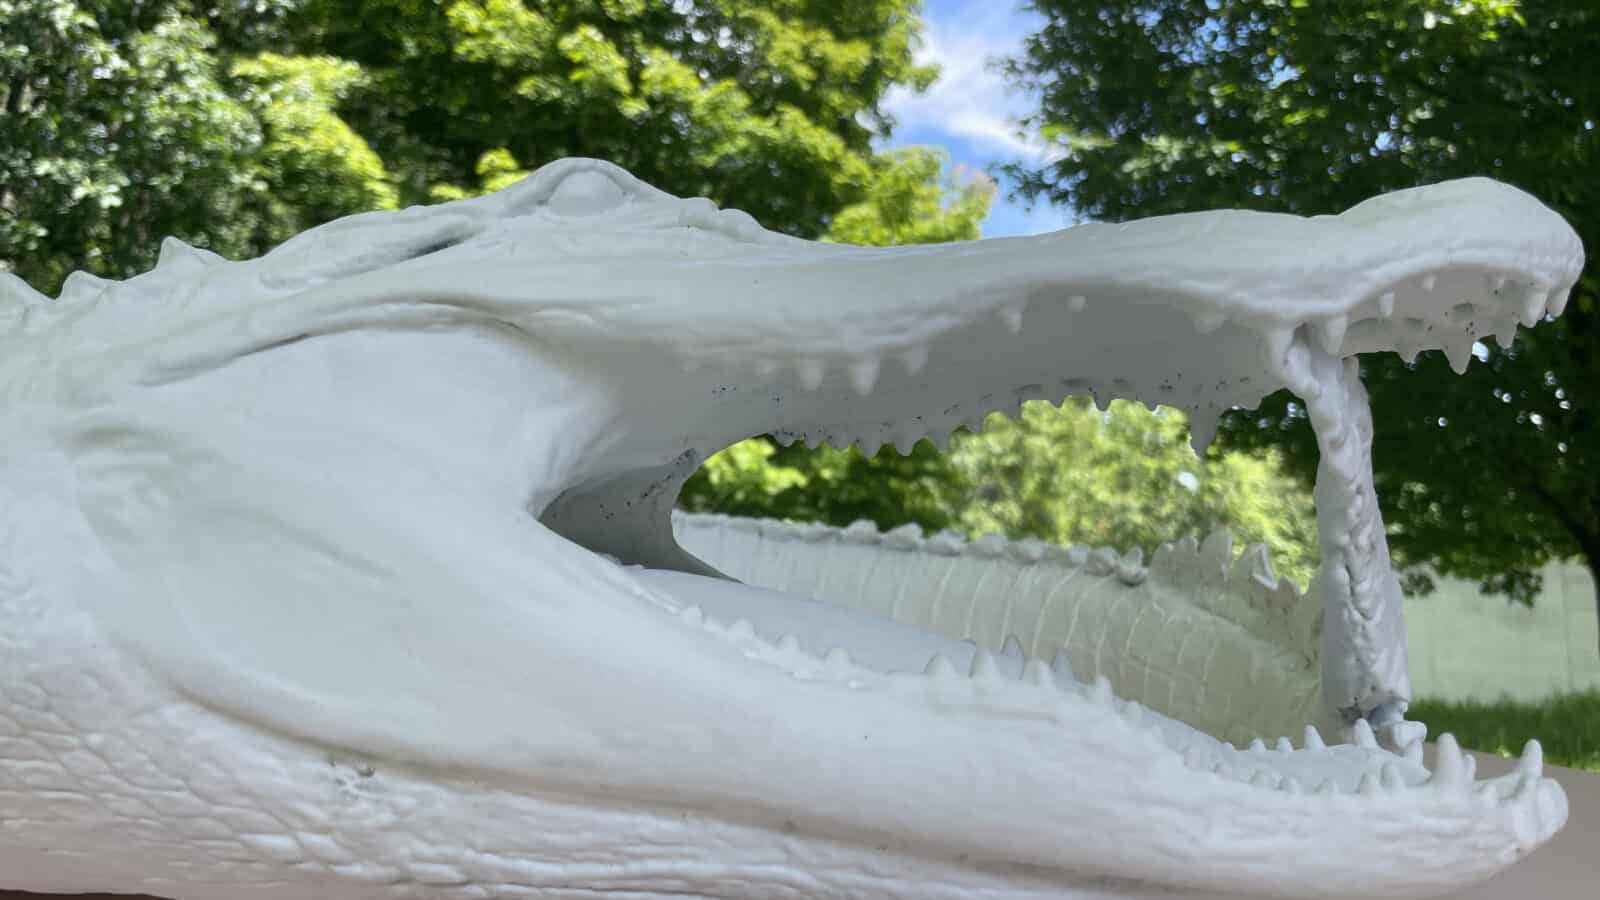 An alligator takes its tail in its mouth in an echo of the mythical ouroboros in Allison Janae Hamilton's sculpture at the Clark Art Institute.